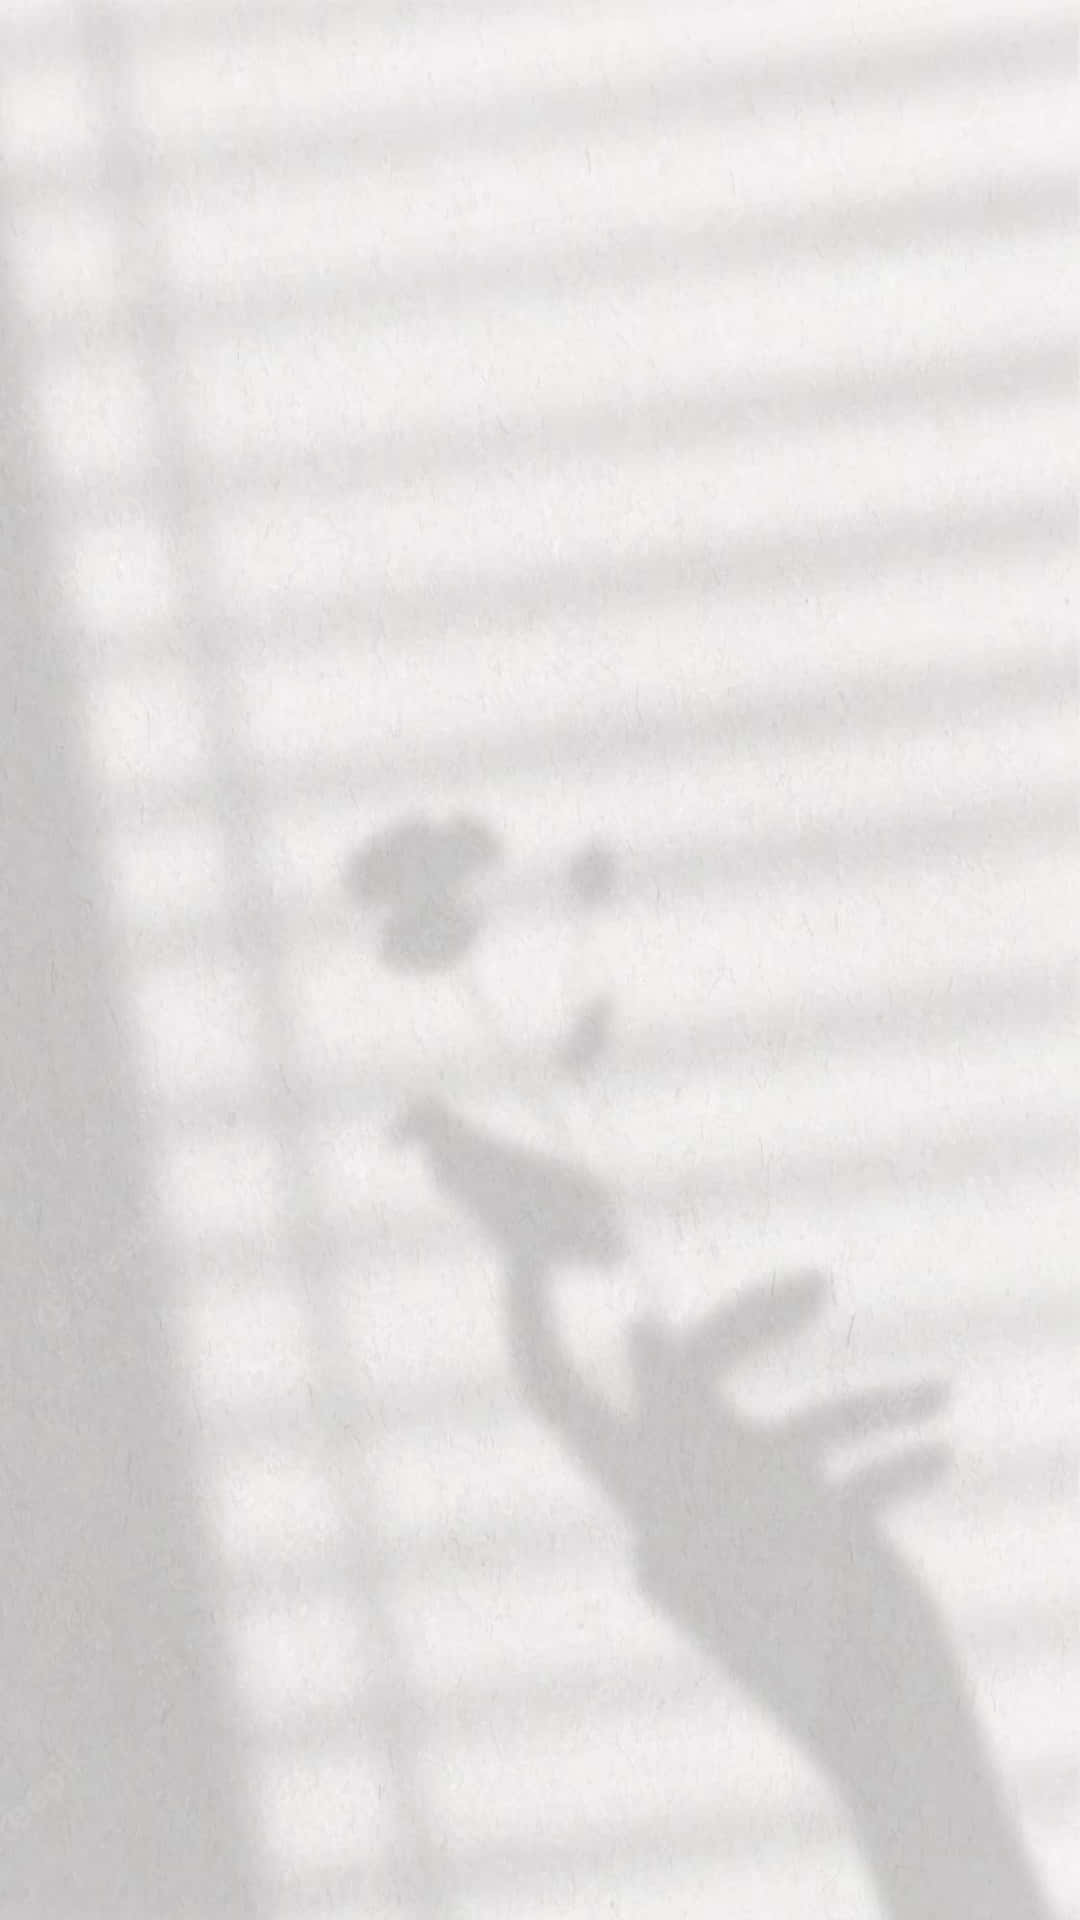 A Shadow Of A Hand On A White Wall Background